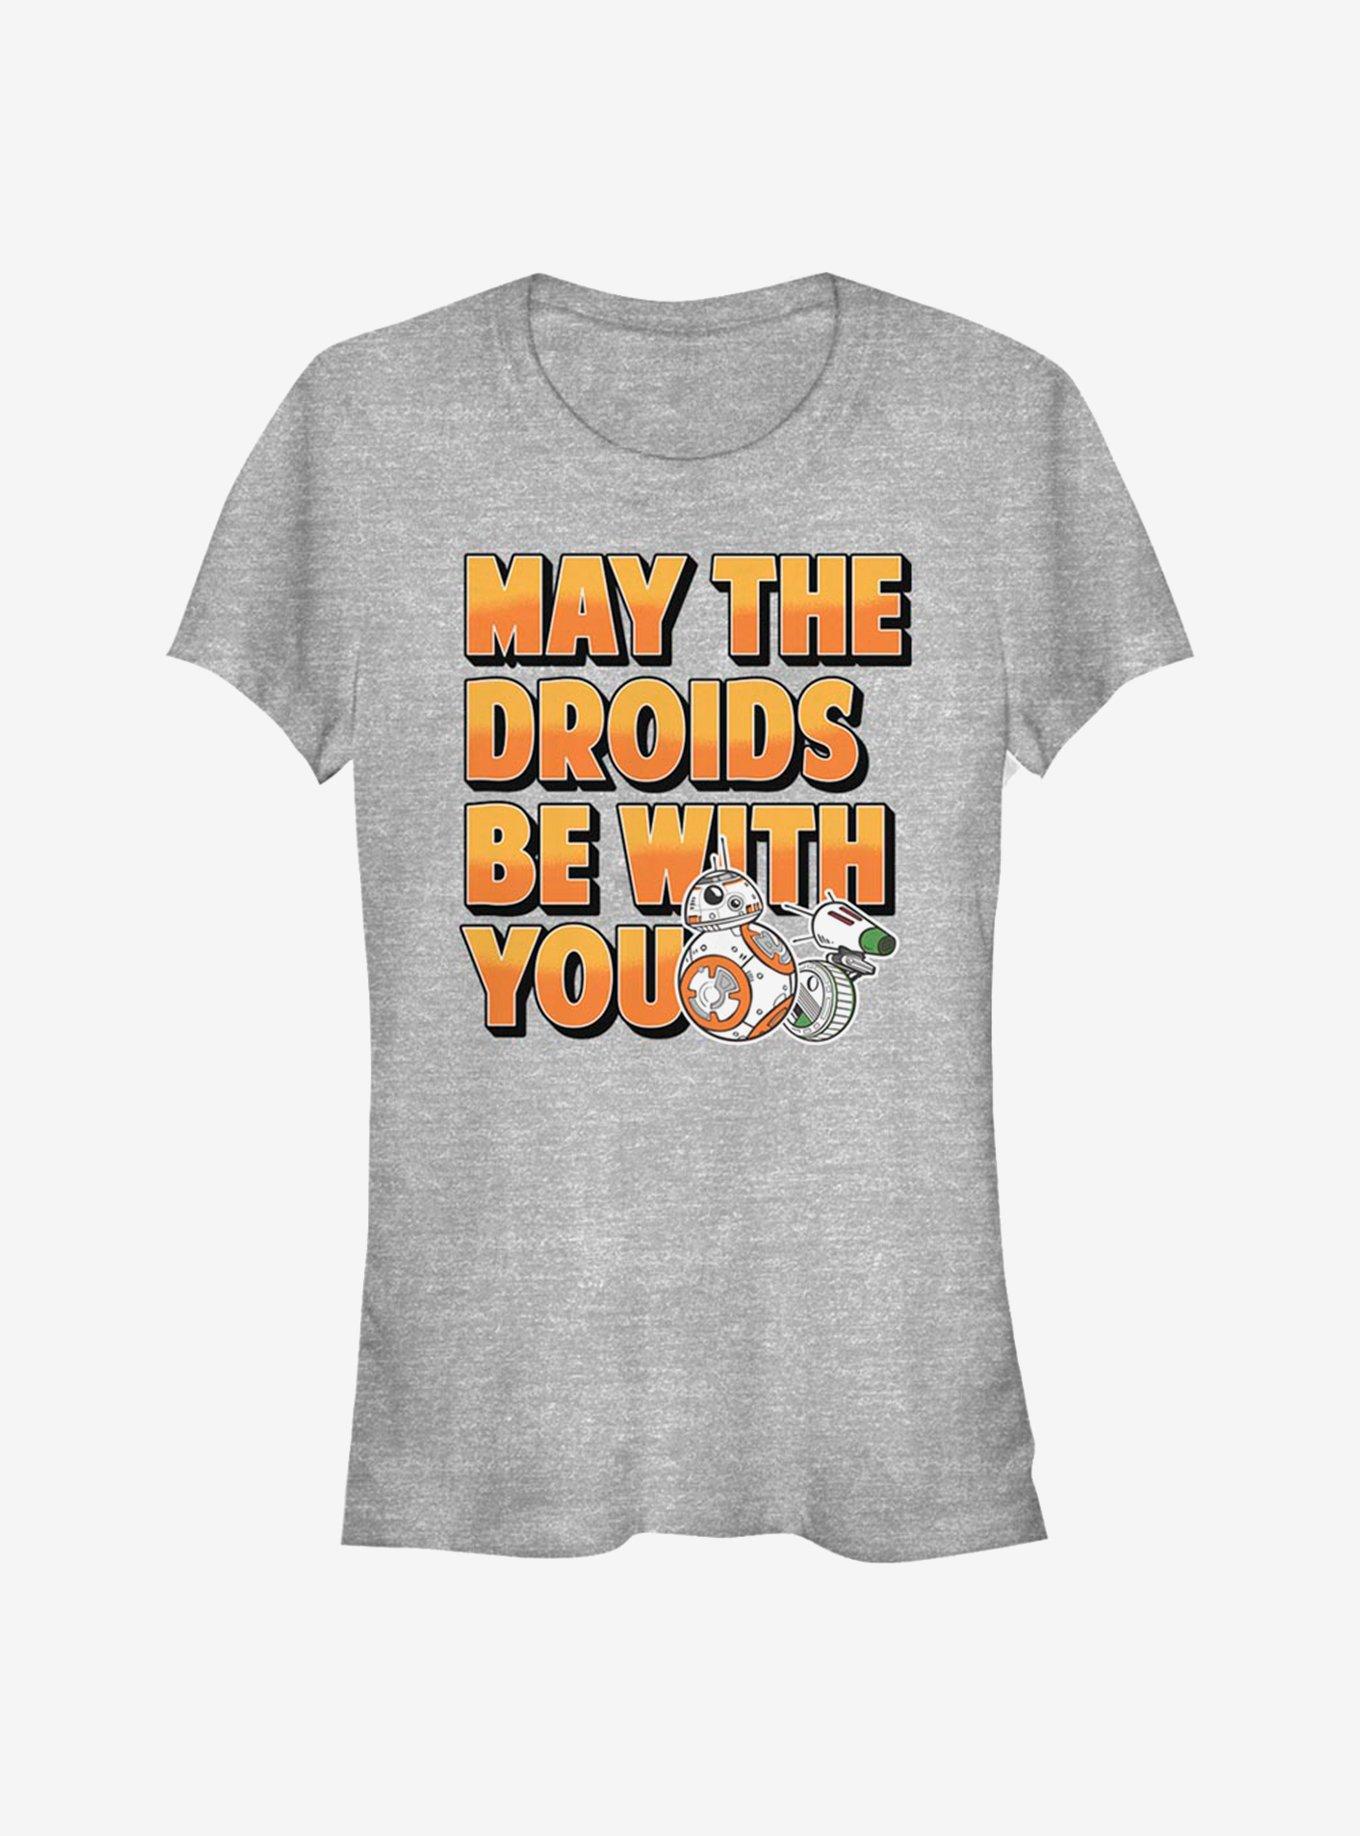 Star Wars: The Rise Of Skywalker Droids Be With You Girls T-Shirt